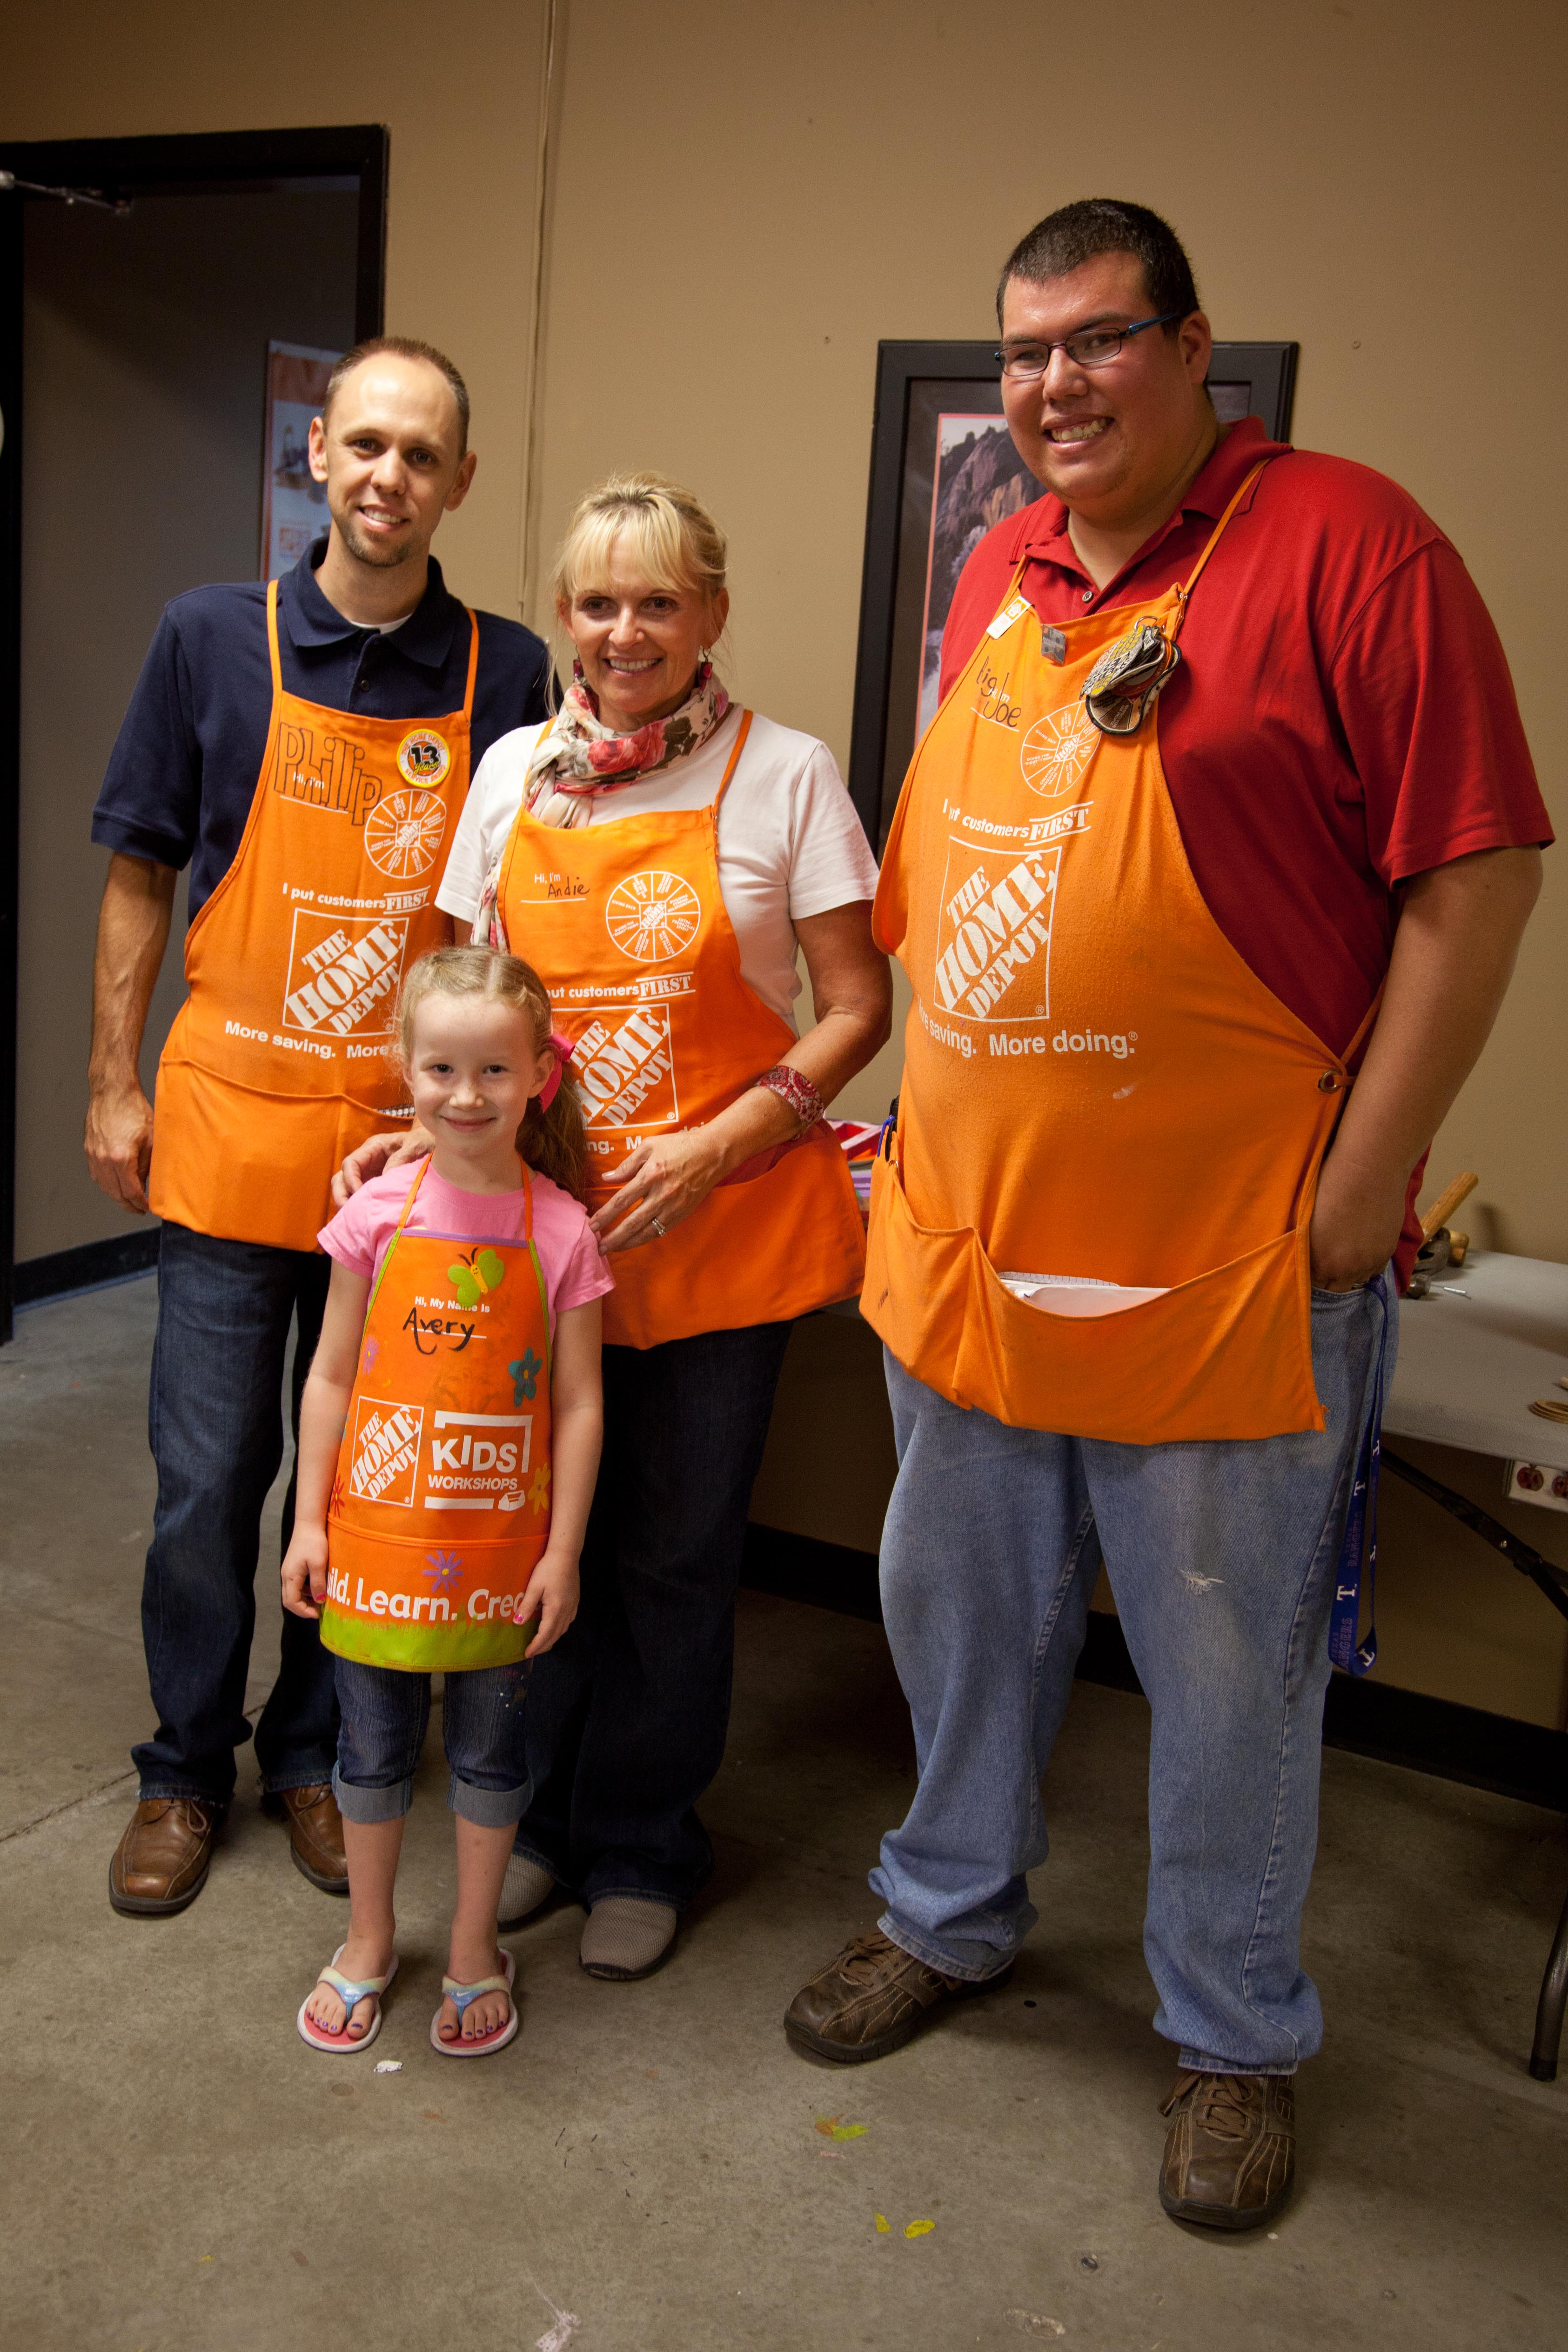 NEW HOME DEPOT KIDS WORKSHOP ORANGE APRON BUILD LEARN CREATE BIRTHDAY PARTY GIFT 